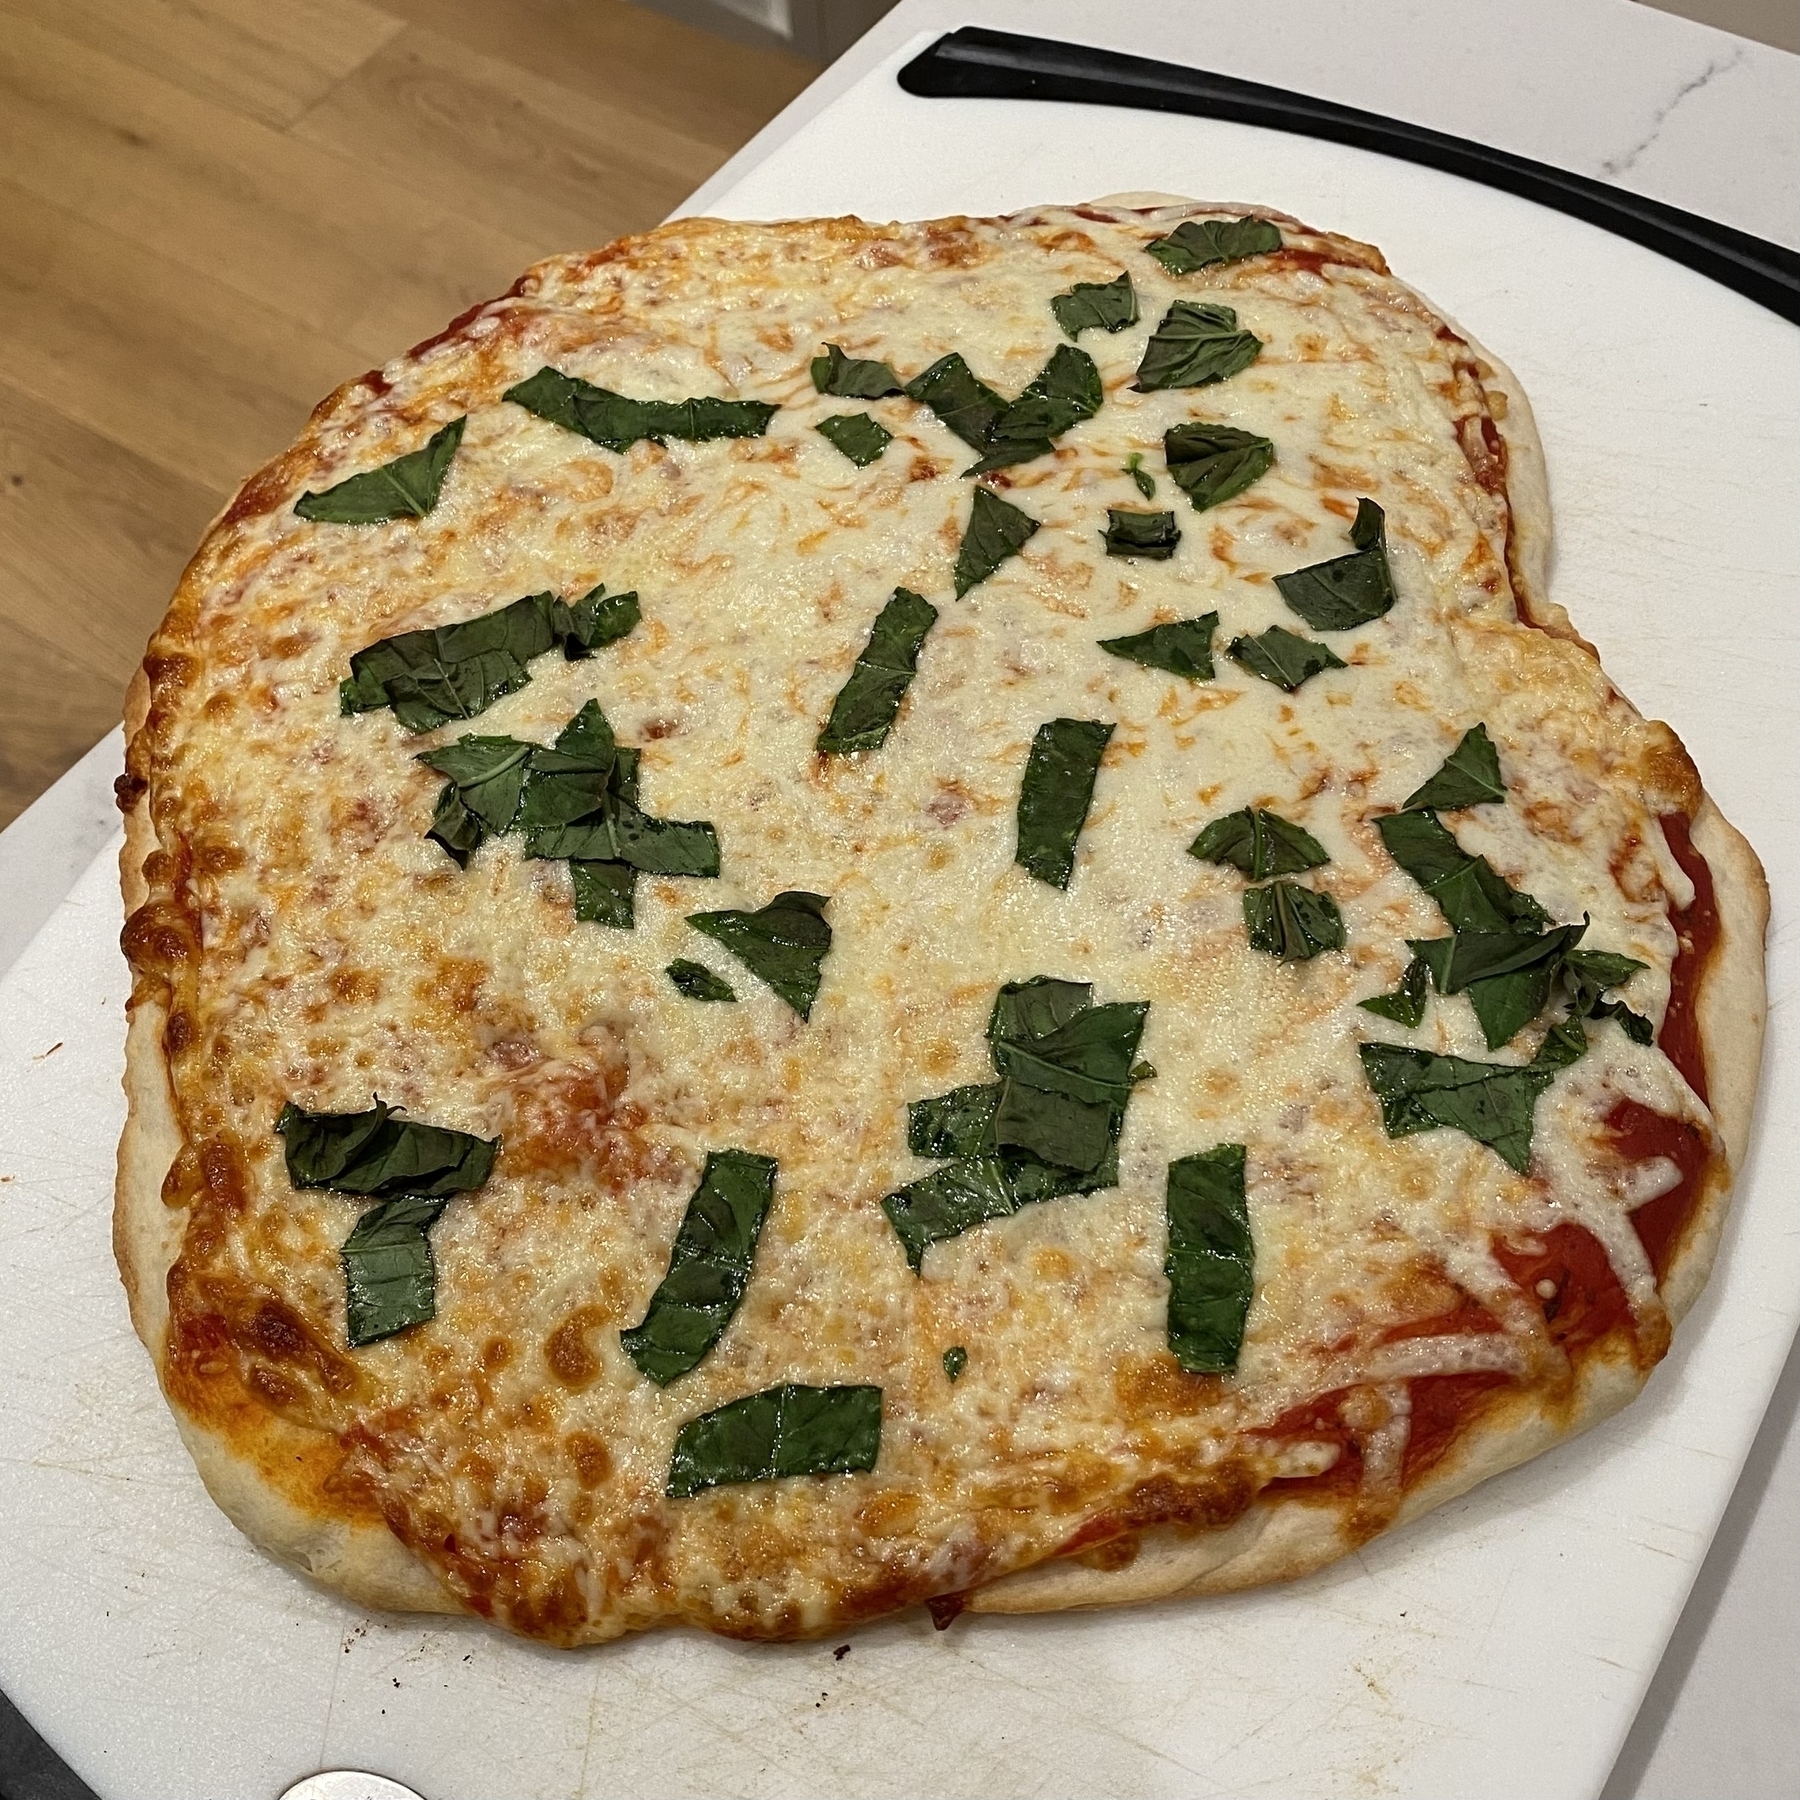 Homemade pizza in the sort of shape of a square